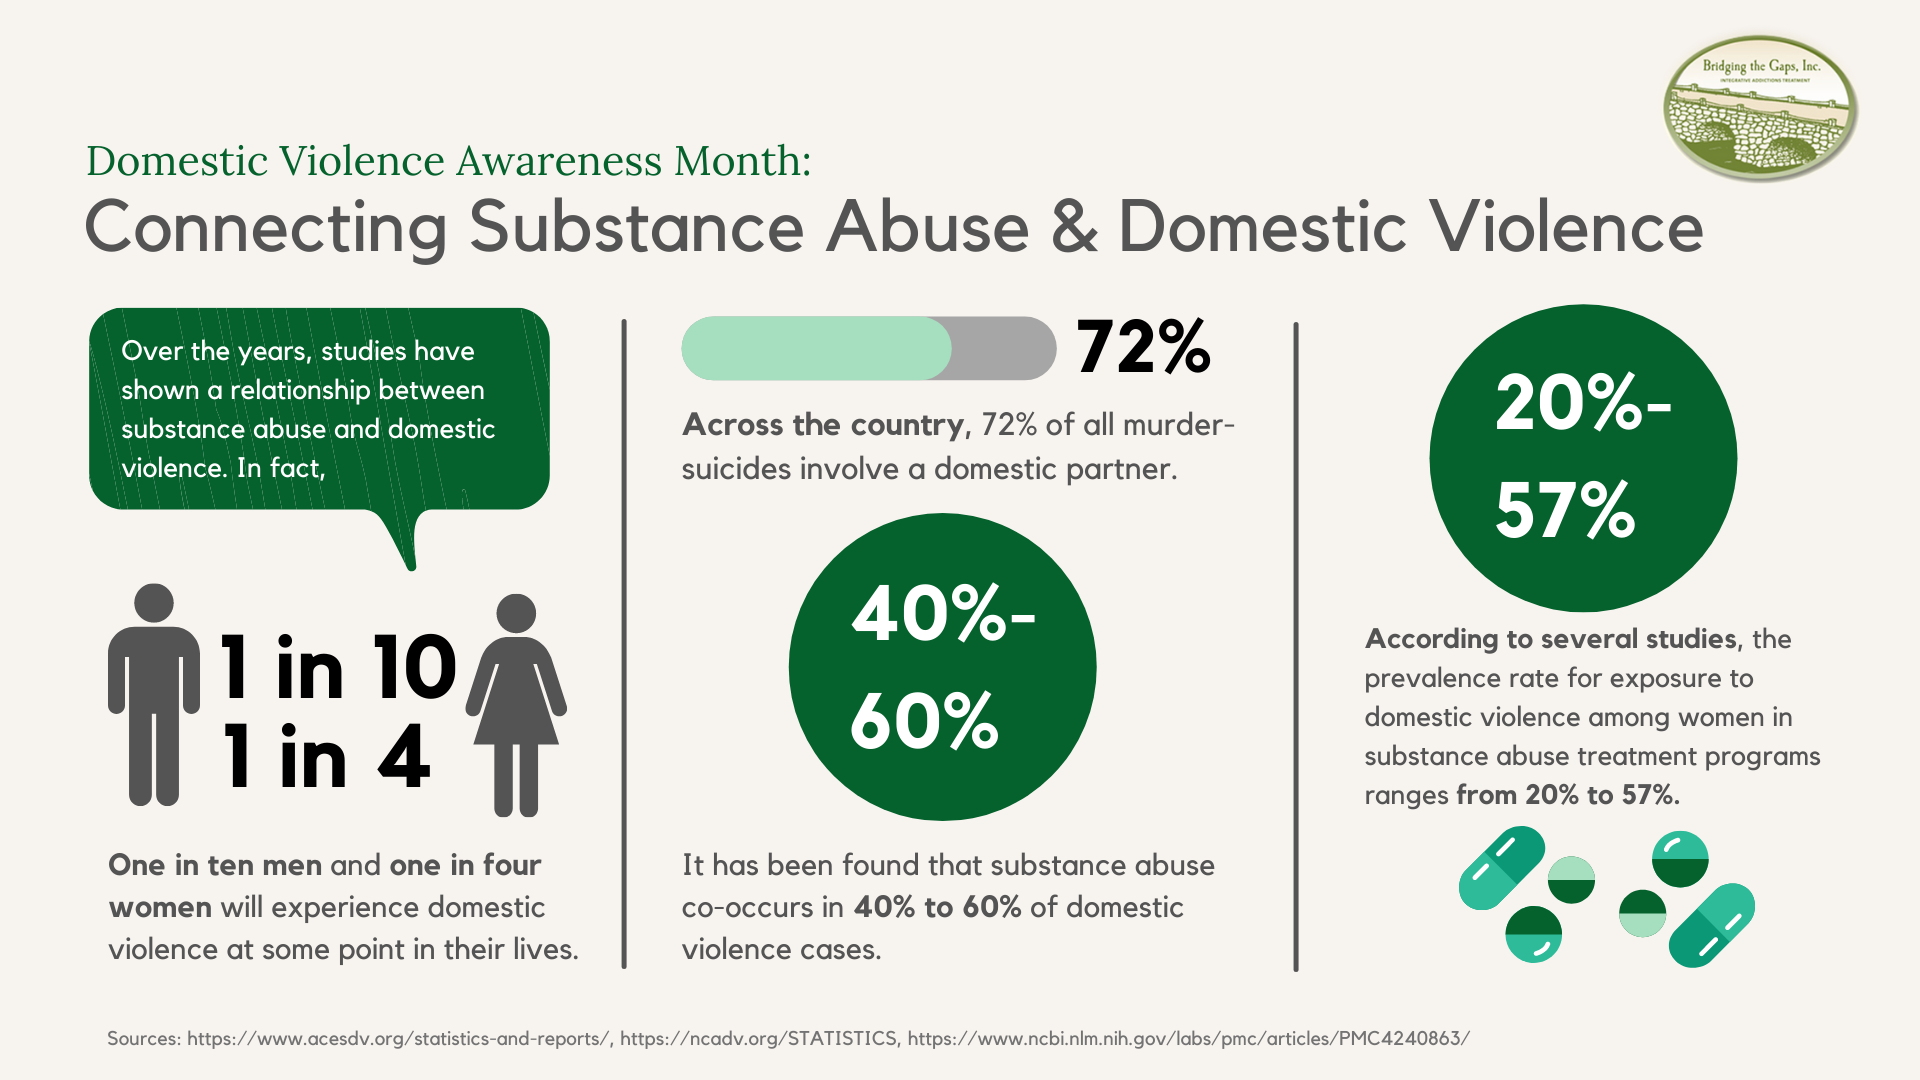 research on substance abuse and domestic violence has concluded that